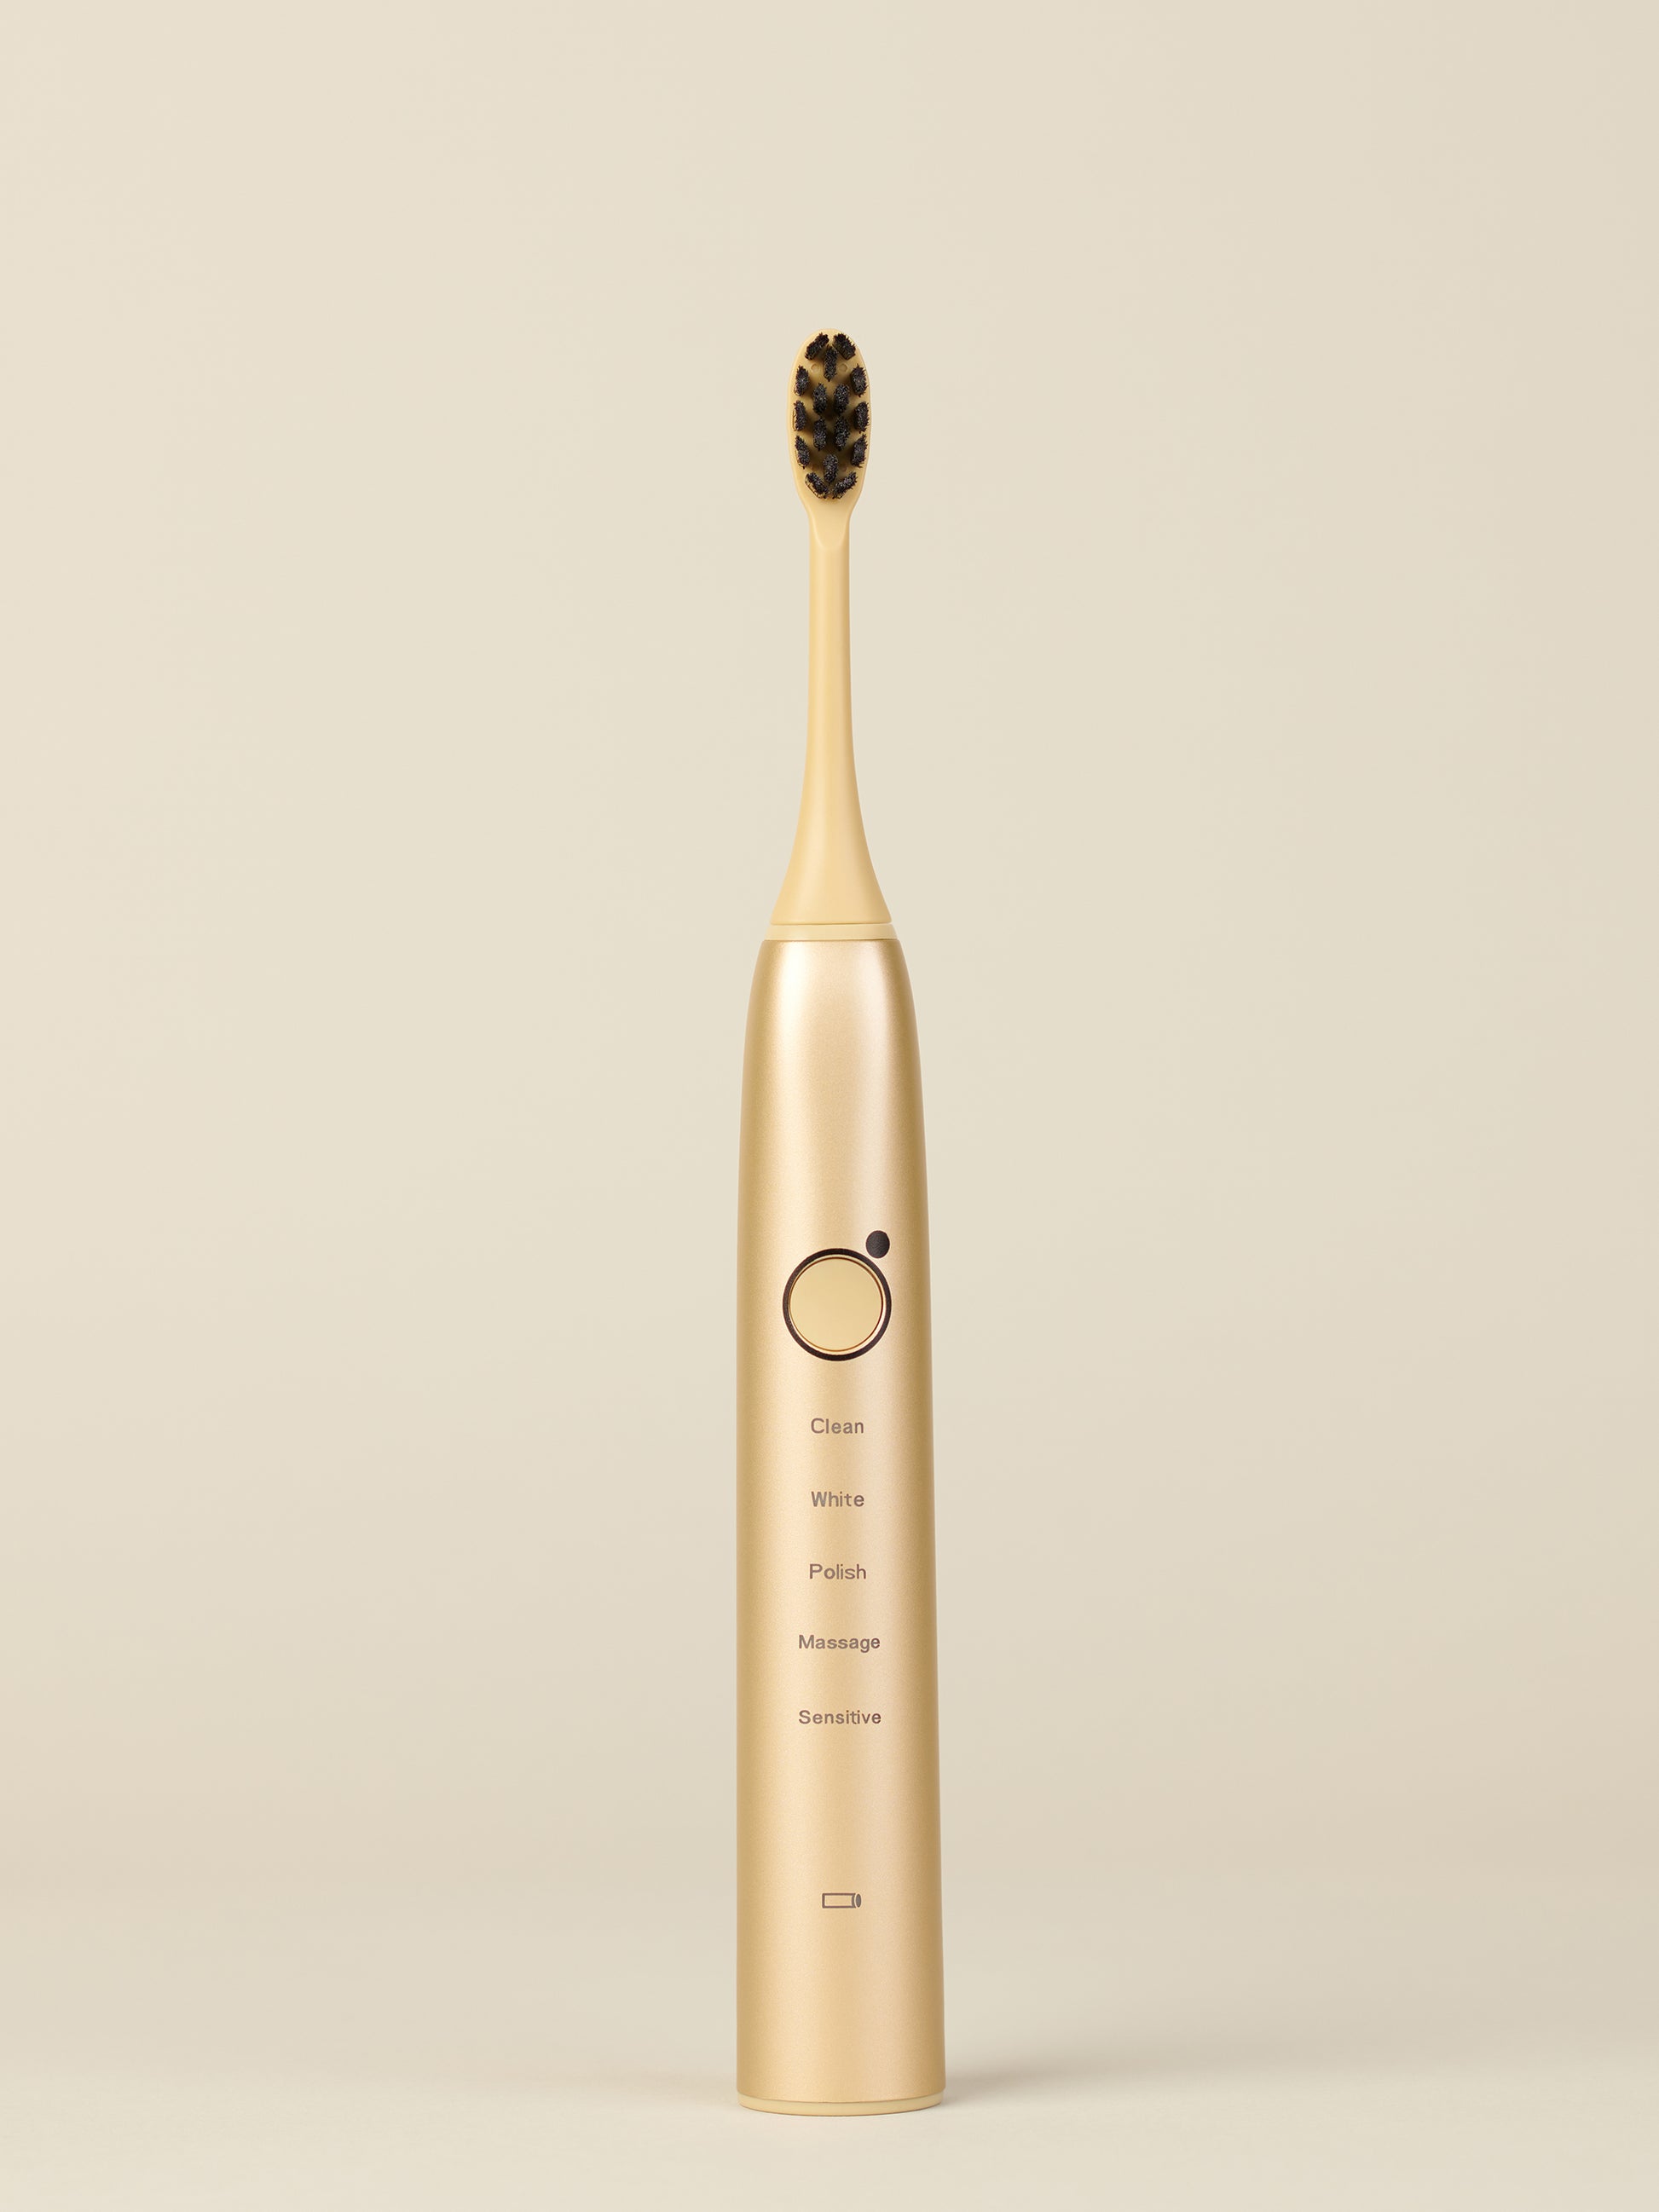 The Gold Electric Toothbrush – Moon Oral Care